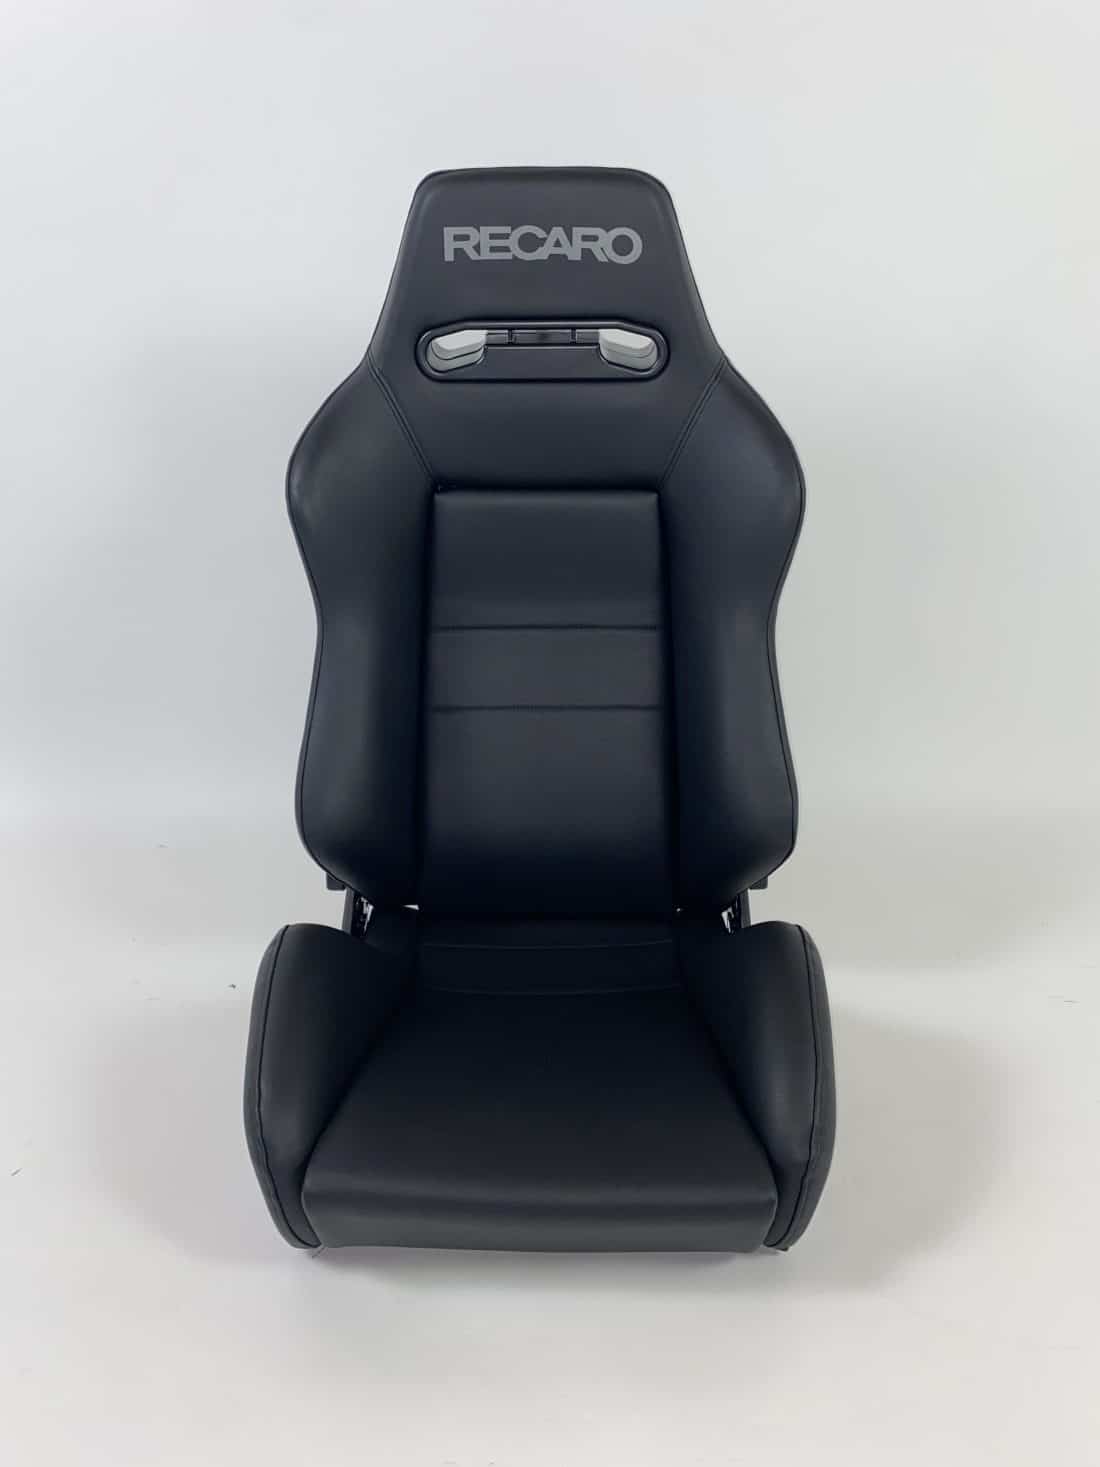 Conteneur Trp Post Data Trp Post Id 12144 Recaro Sr5 Speed Faux Leather Black Trp Post Container